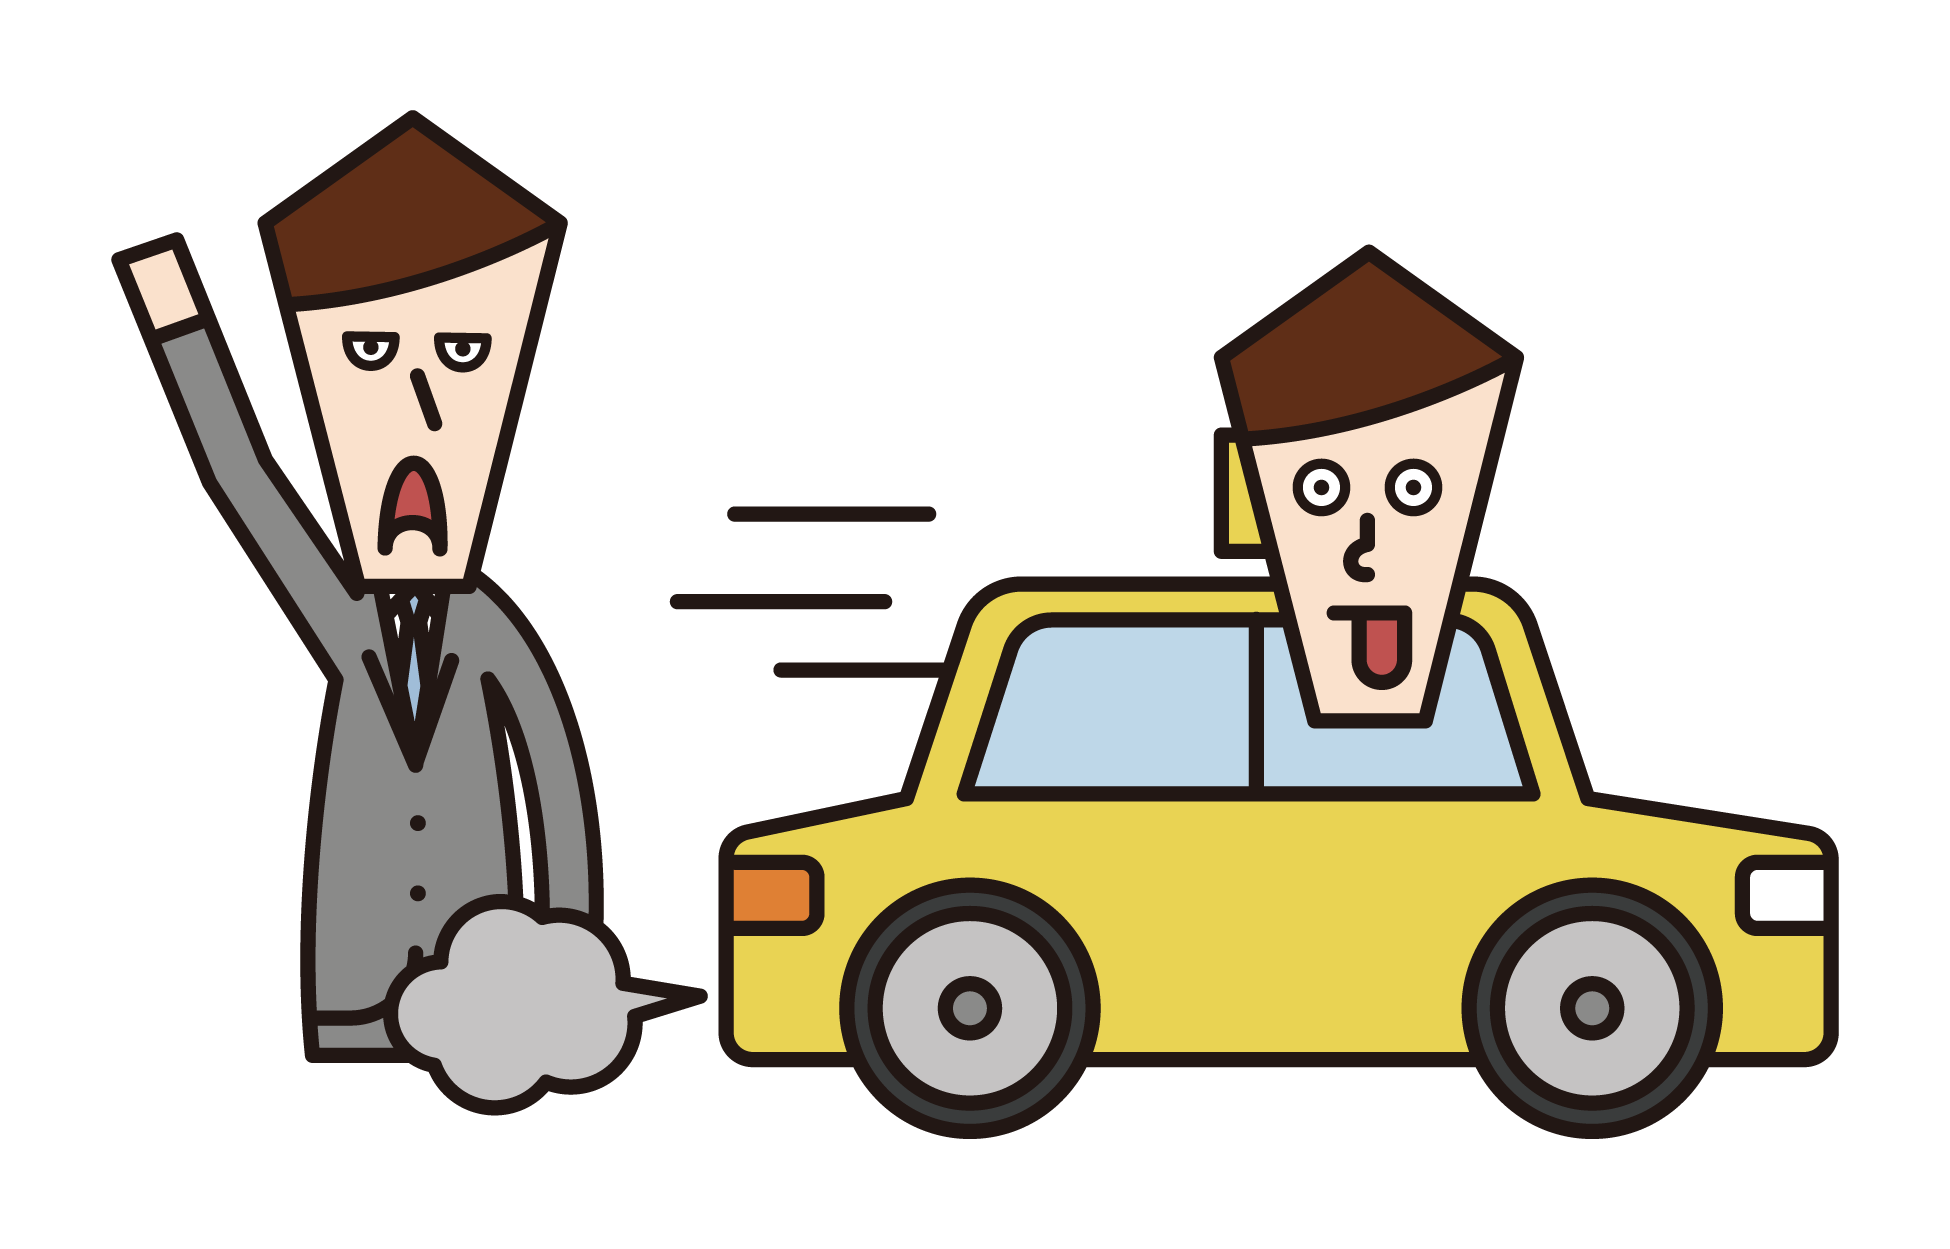 Illustration of a man who failed to catch a taxi